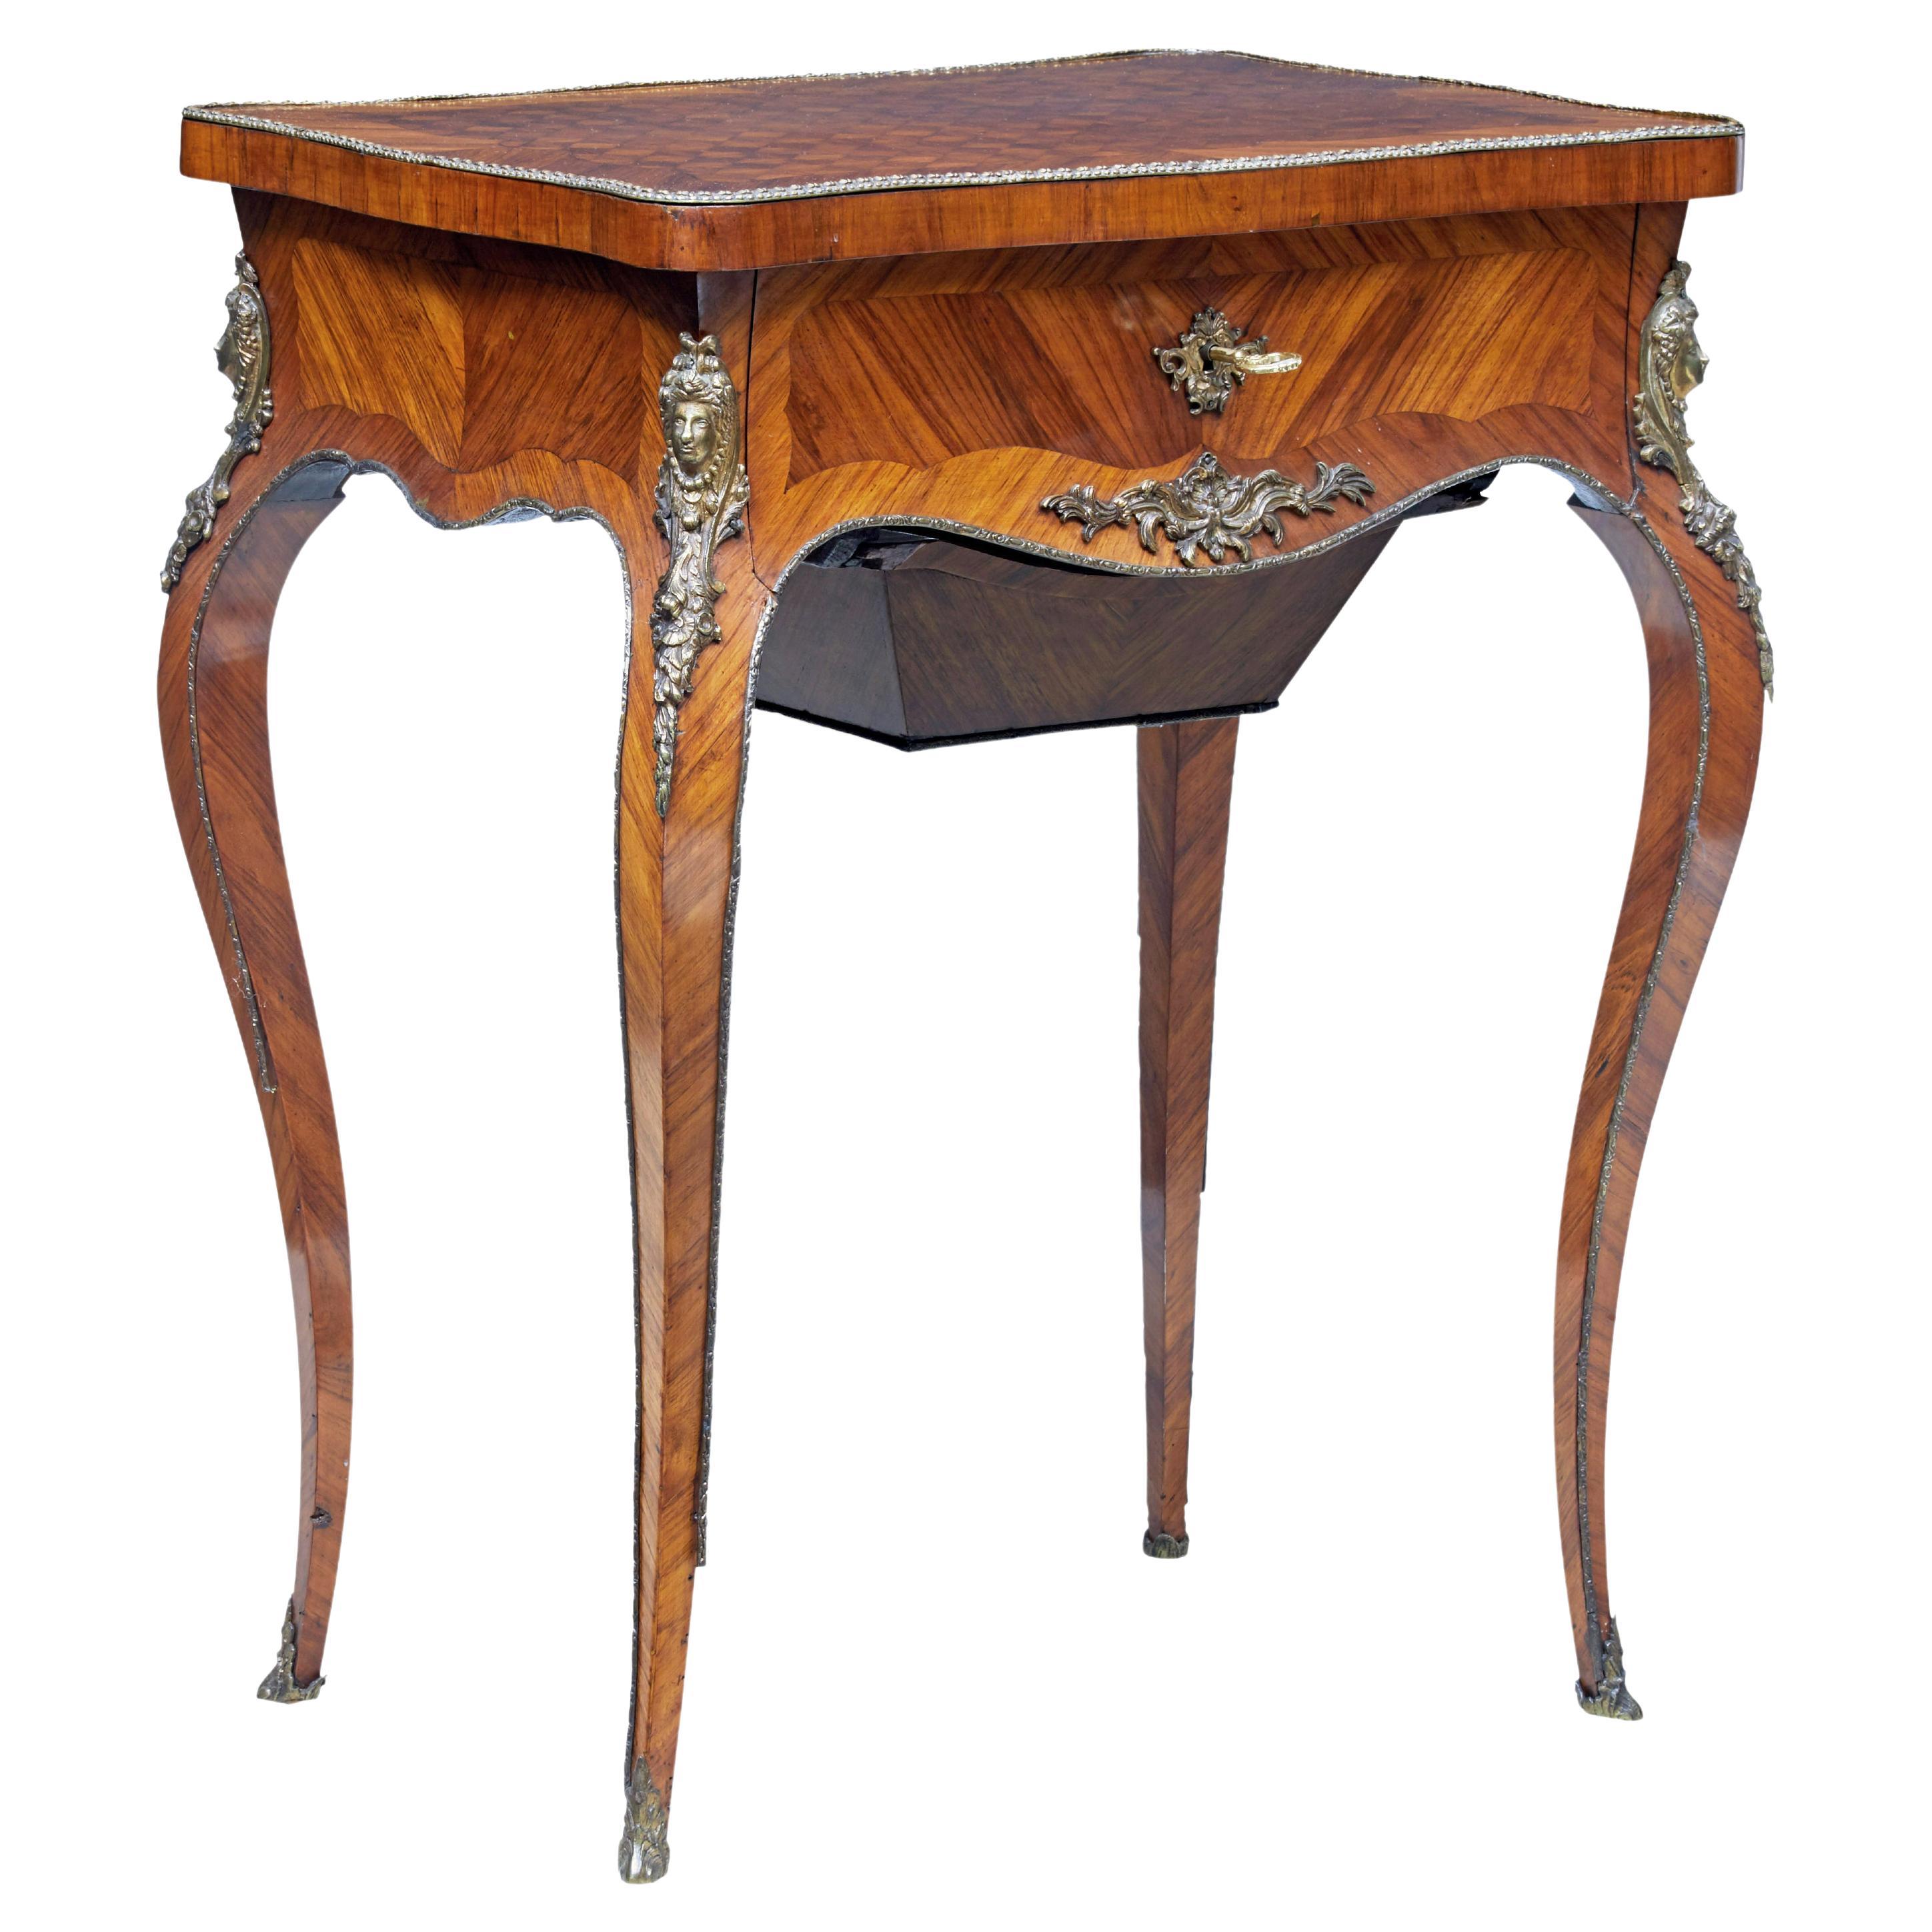 19th century French kingwood sewing work table